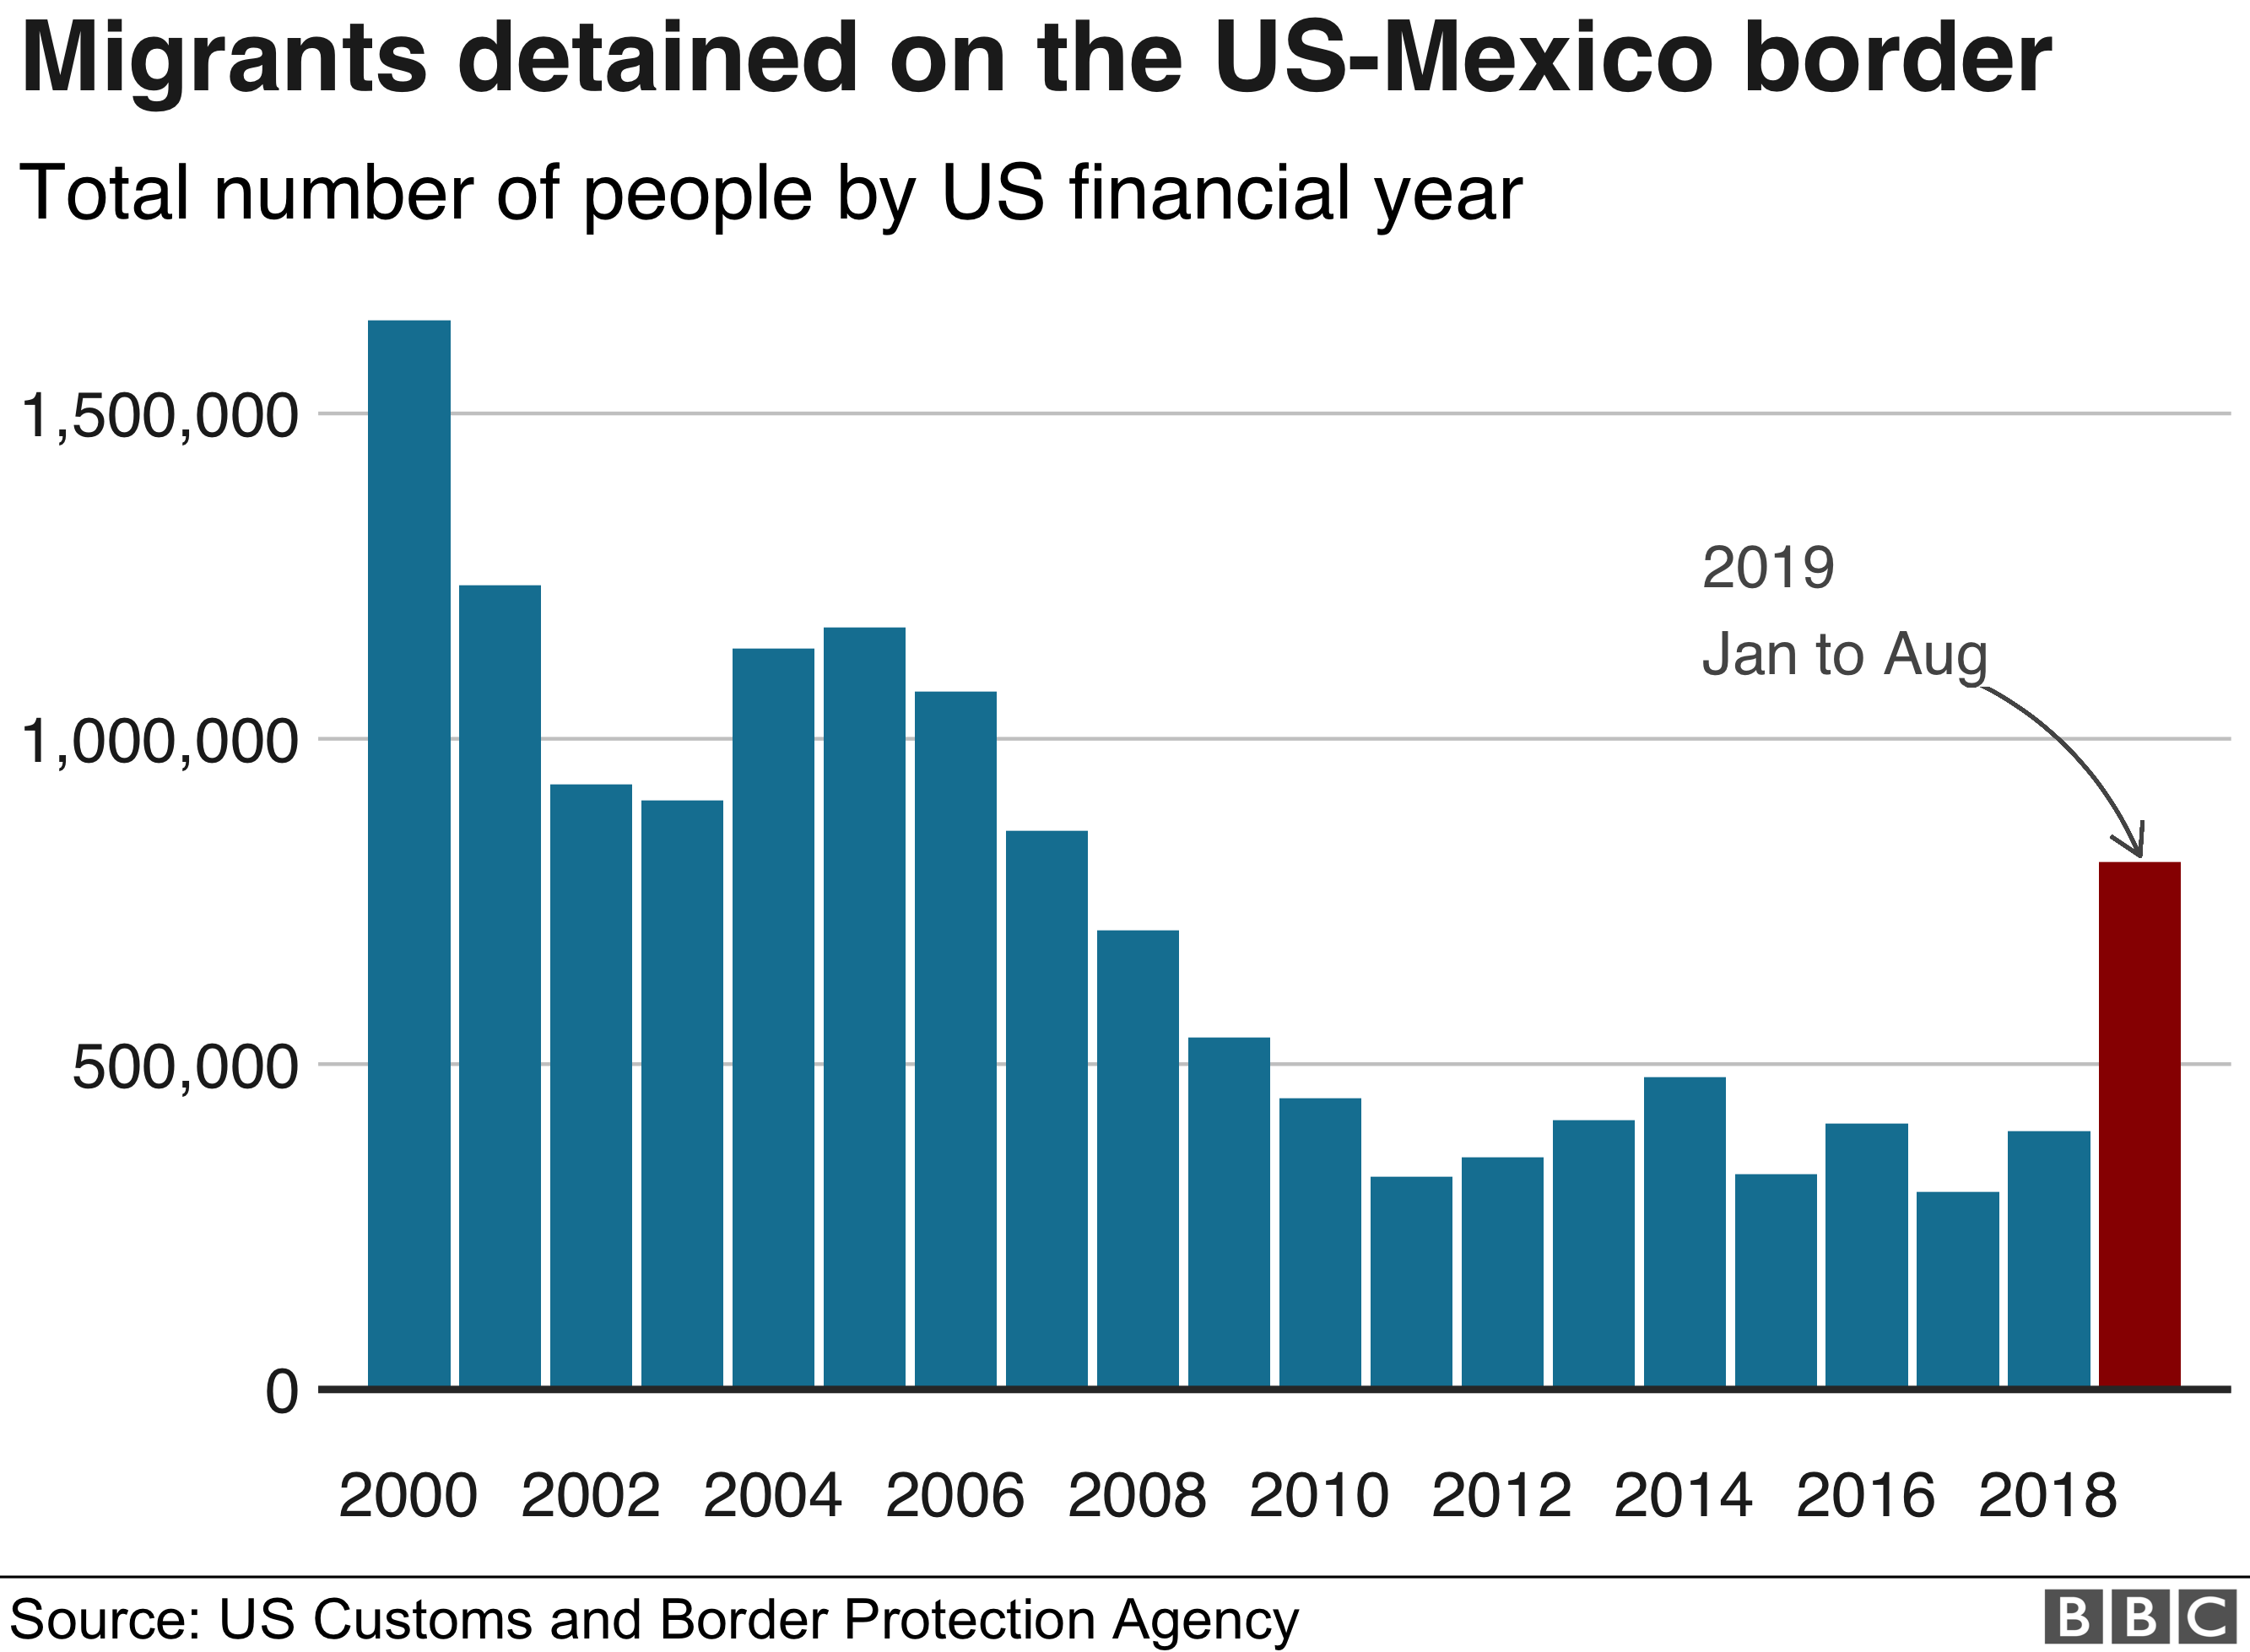 Migrants detained on the US-Mexico border from 2000-2019